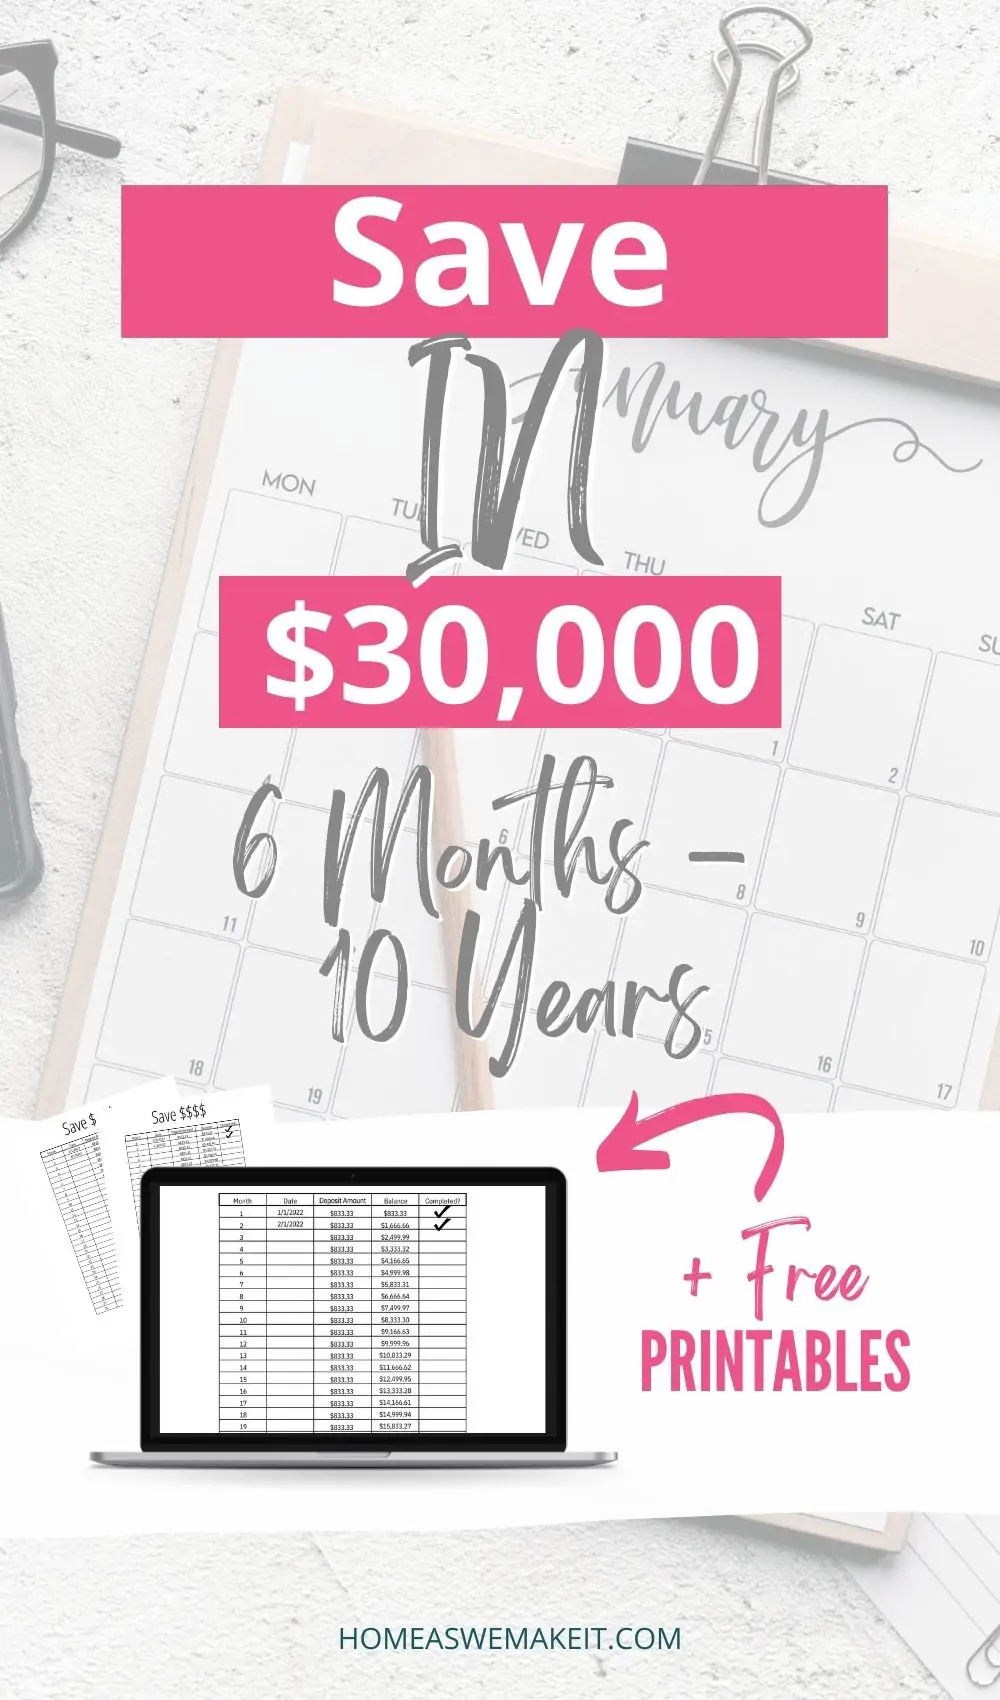 Save $30,000 in 6 months to 1 year with free printable savings trackers